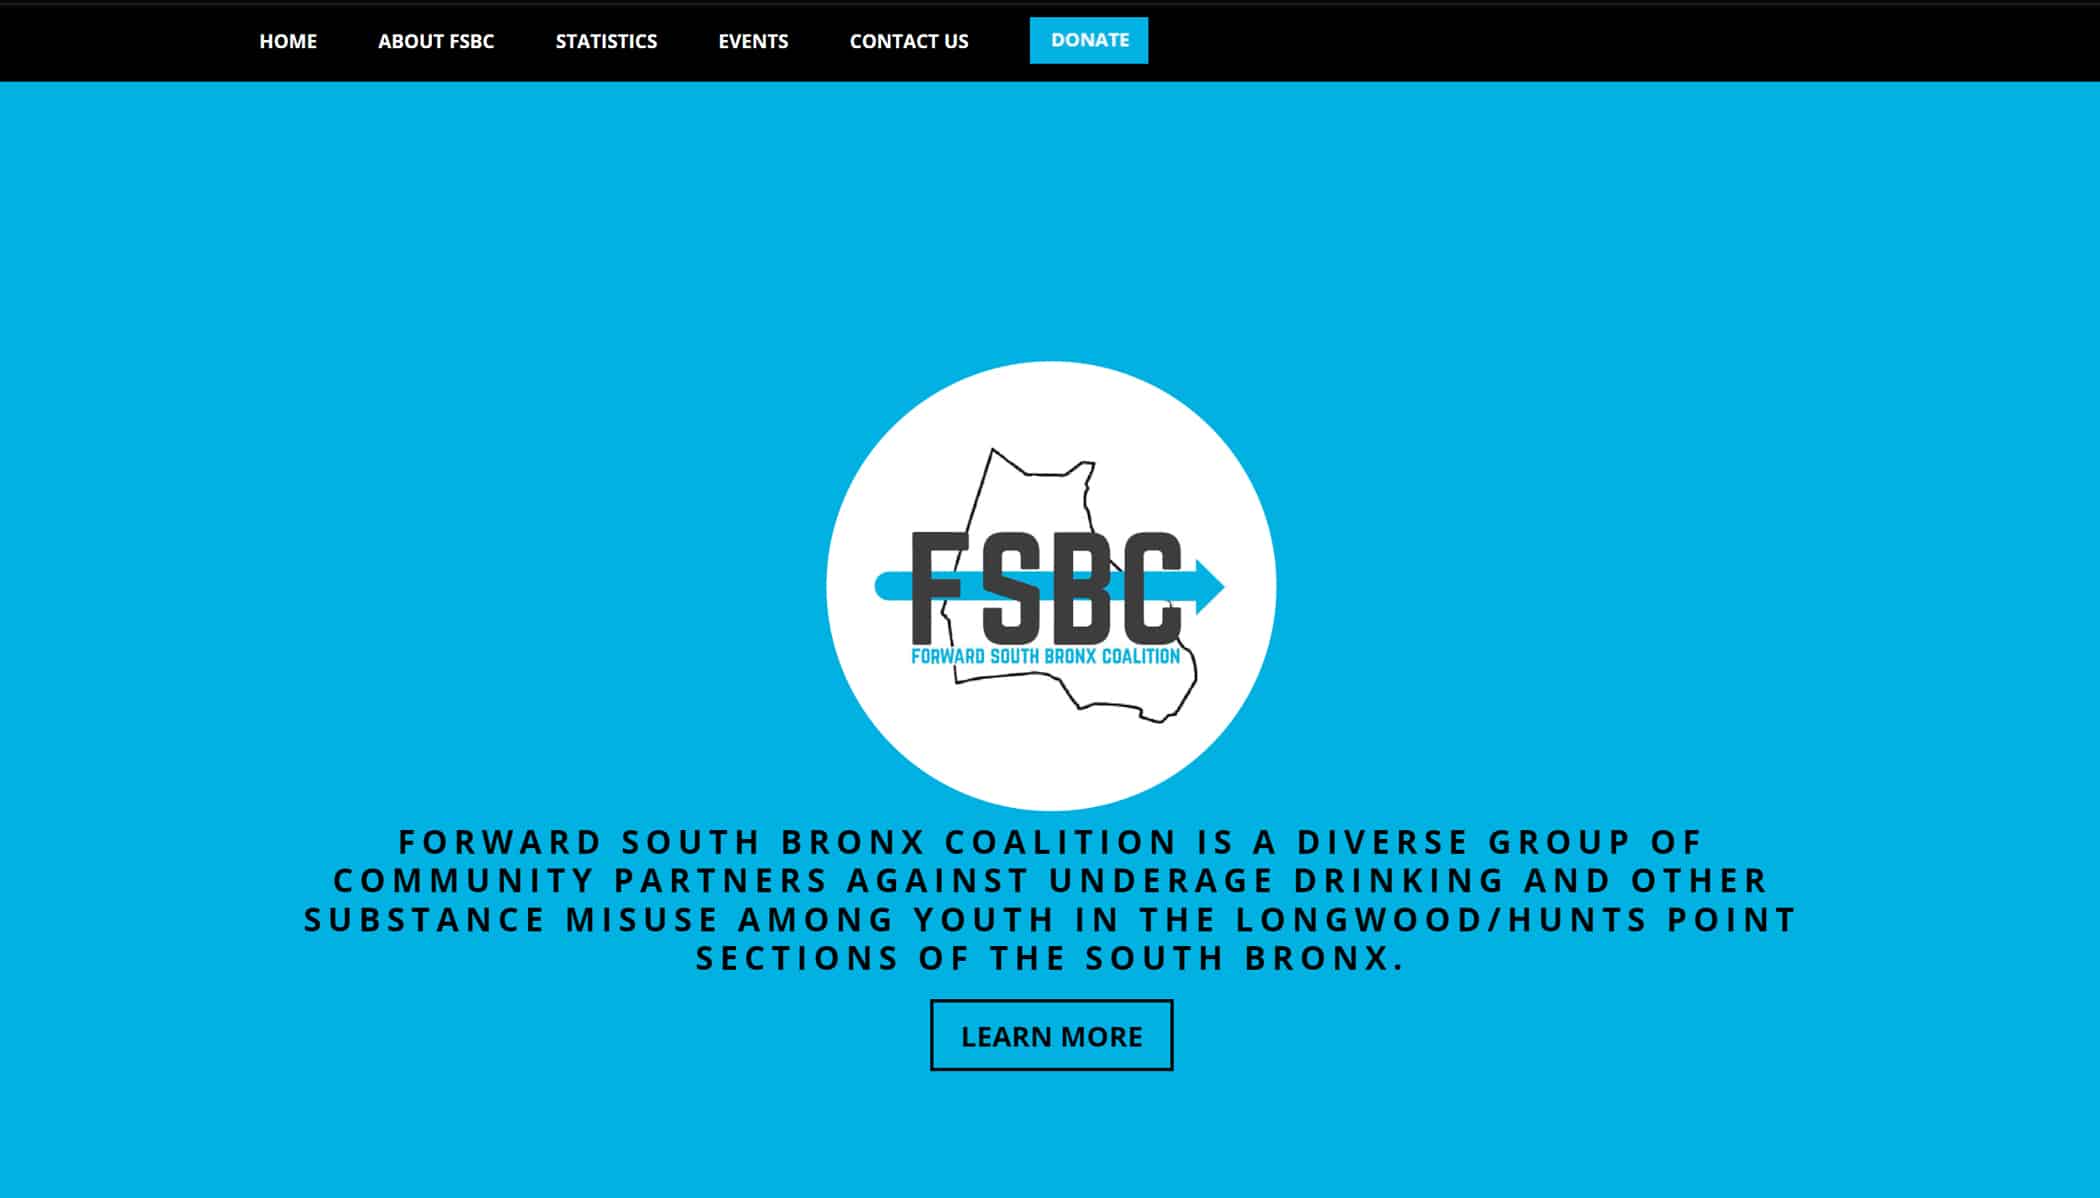 Forward South Bronx Coalition Website Design image prior to Axxiem.